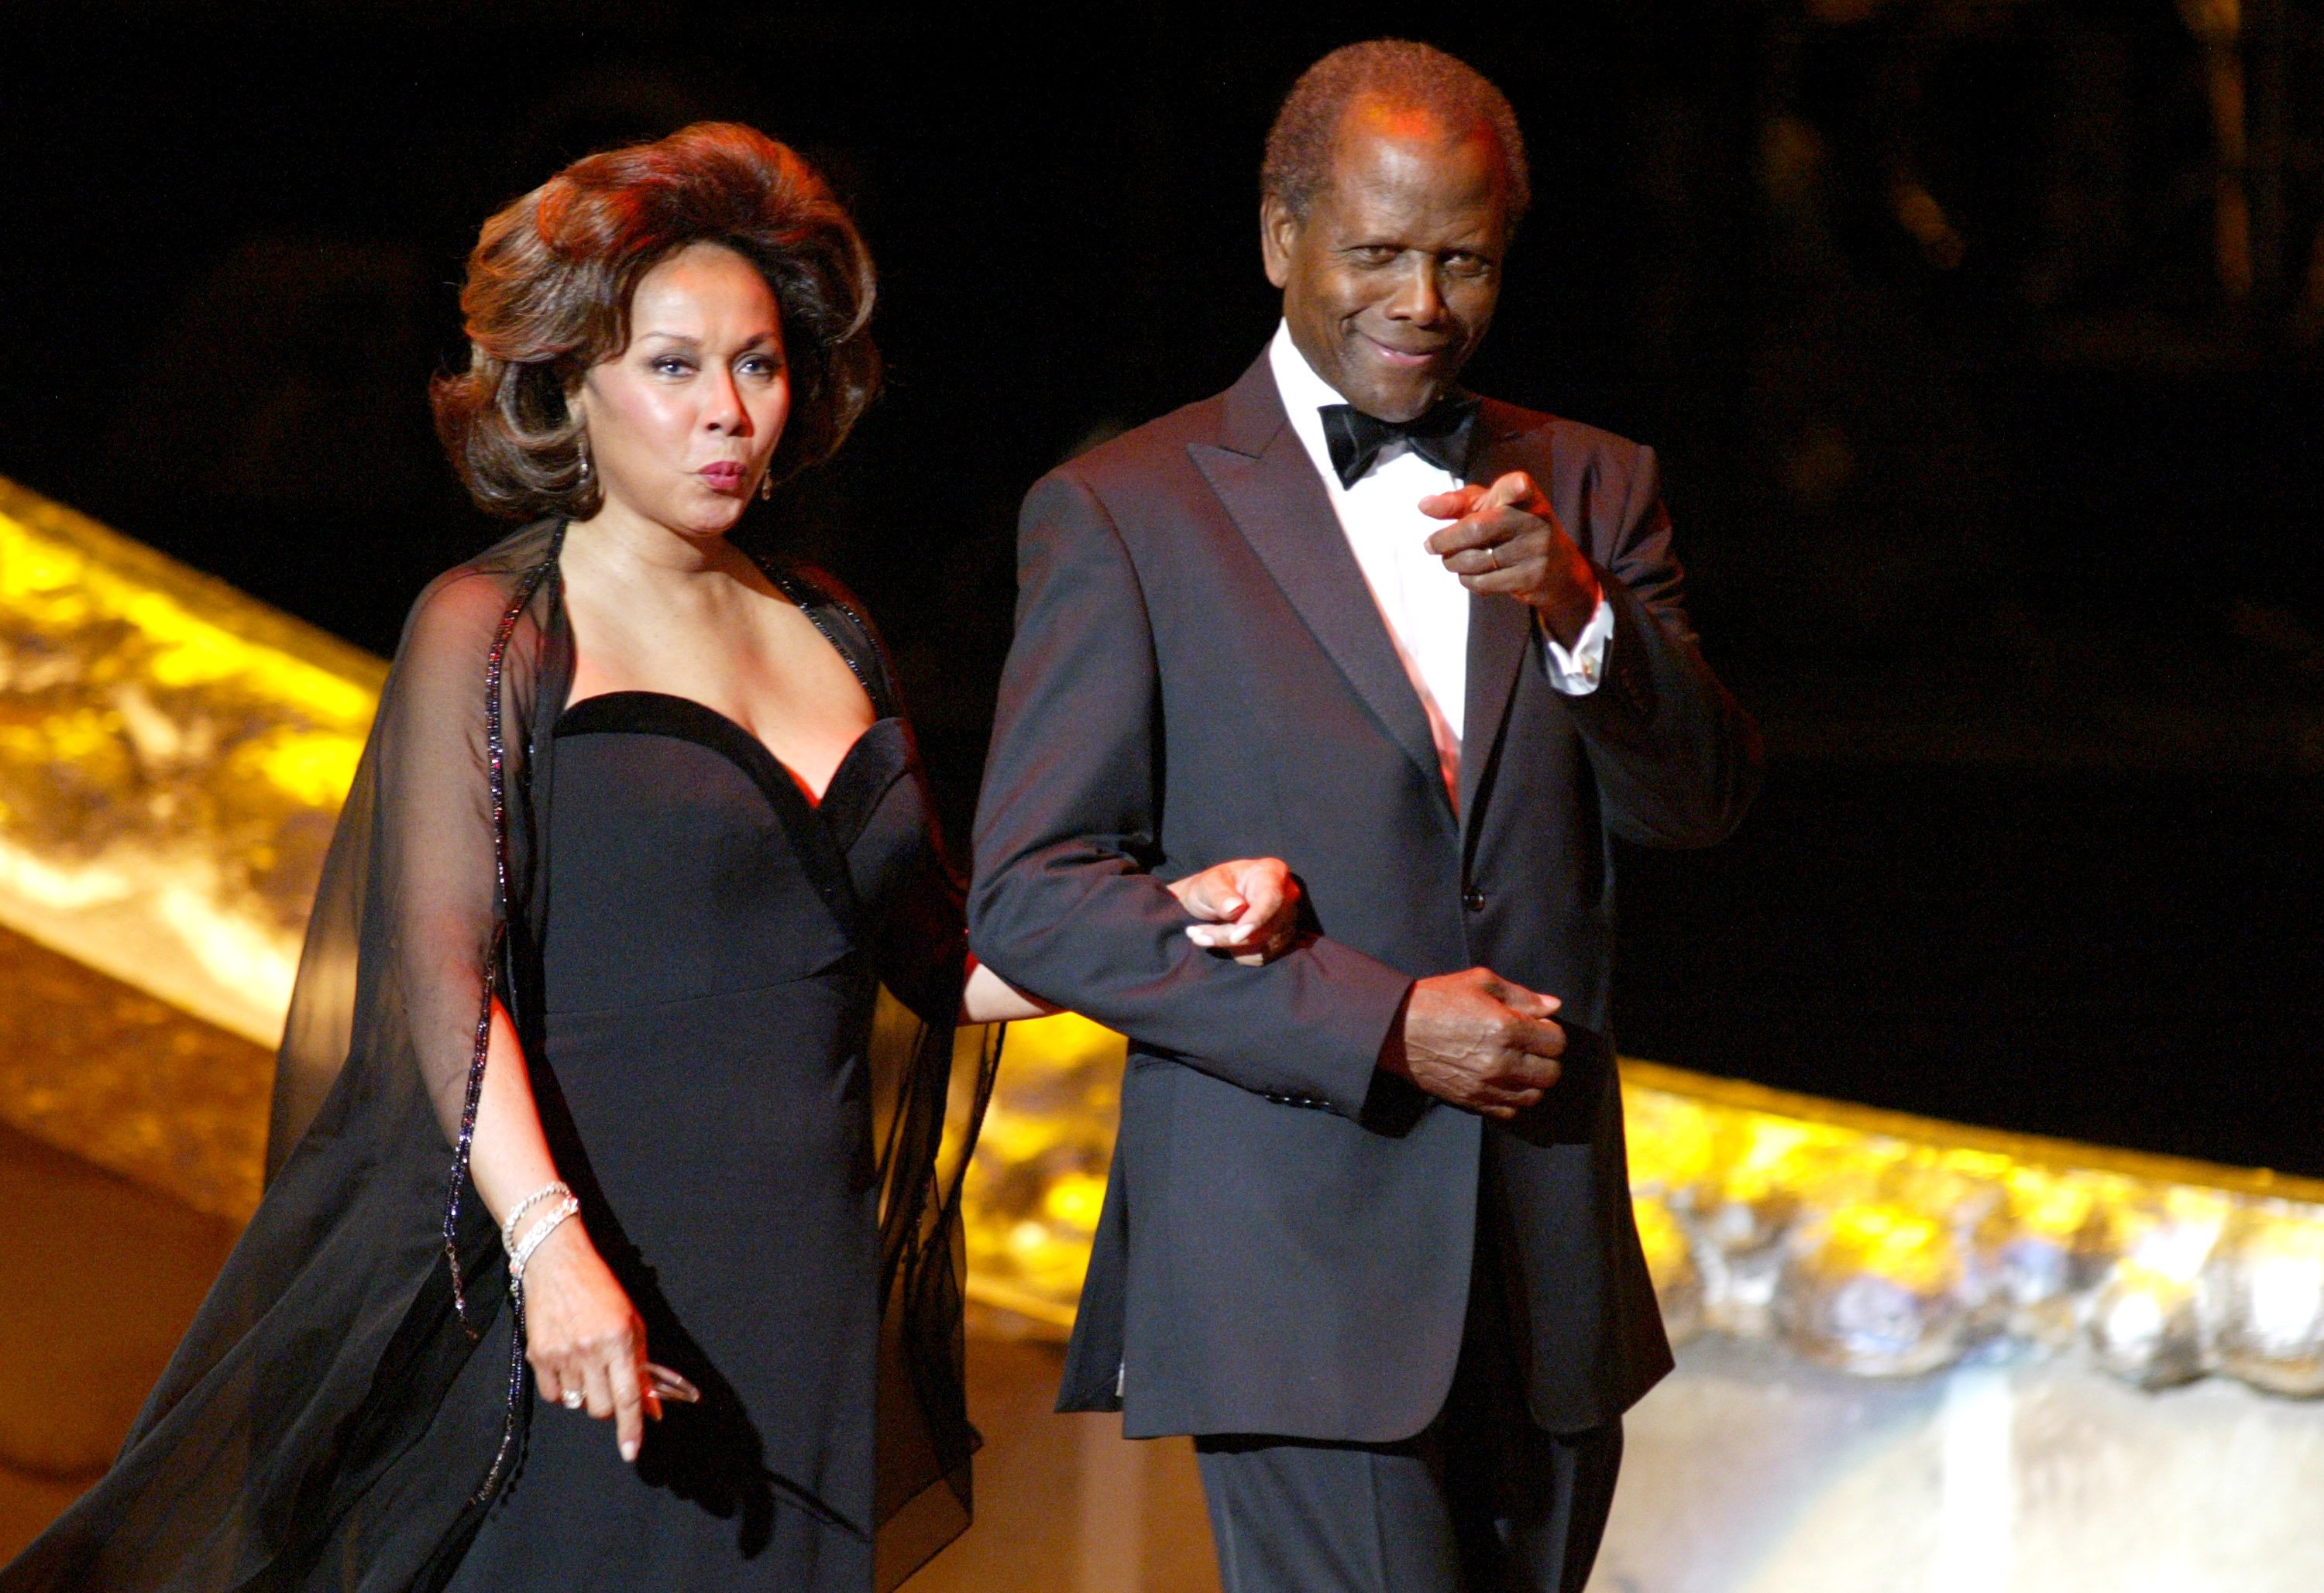 Diahann Carroll and Sidney Poitier at the 36th Annual NAACP Image Awards on March 19, 2005 | Photo: Getty Images